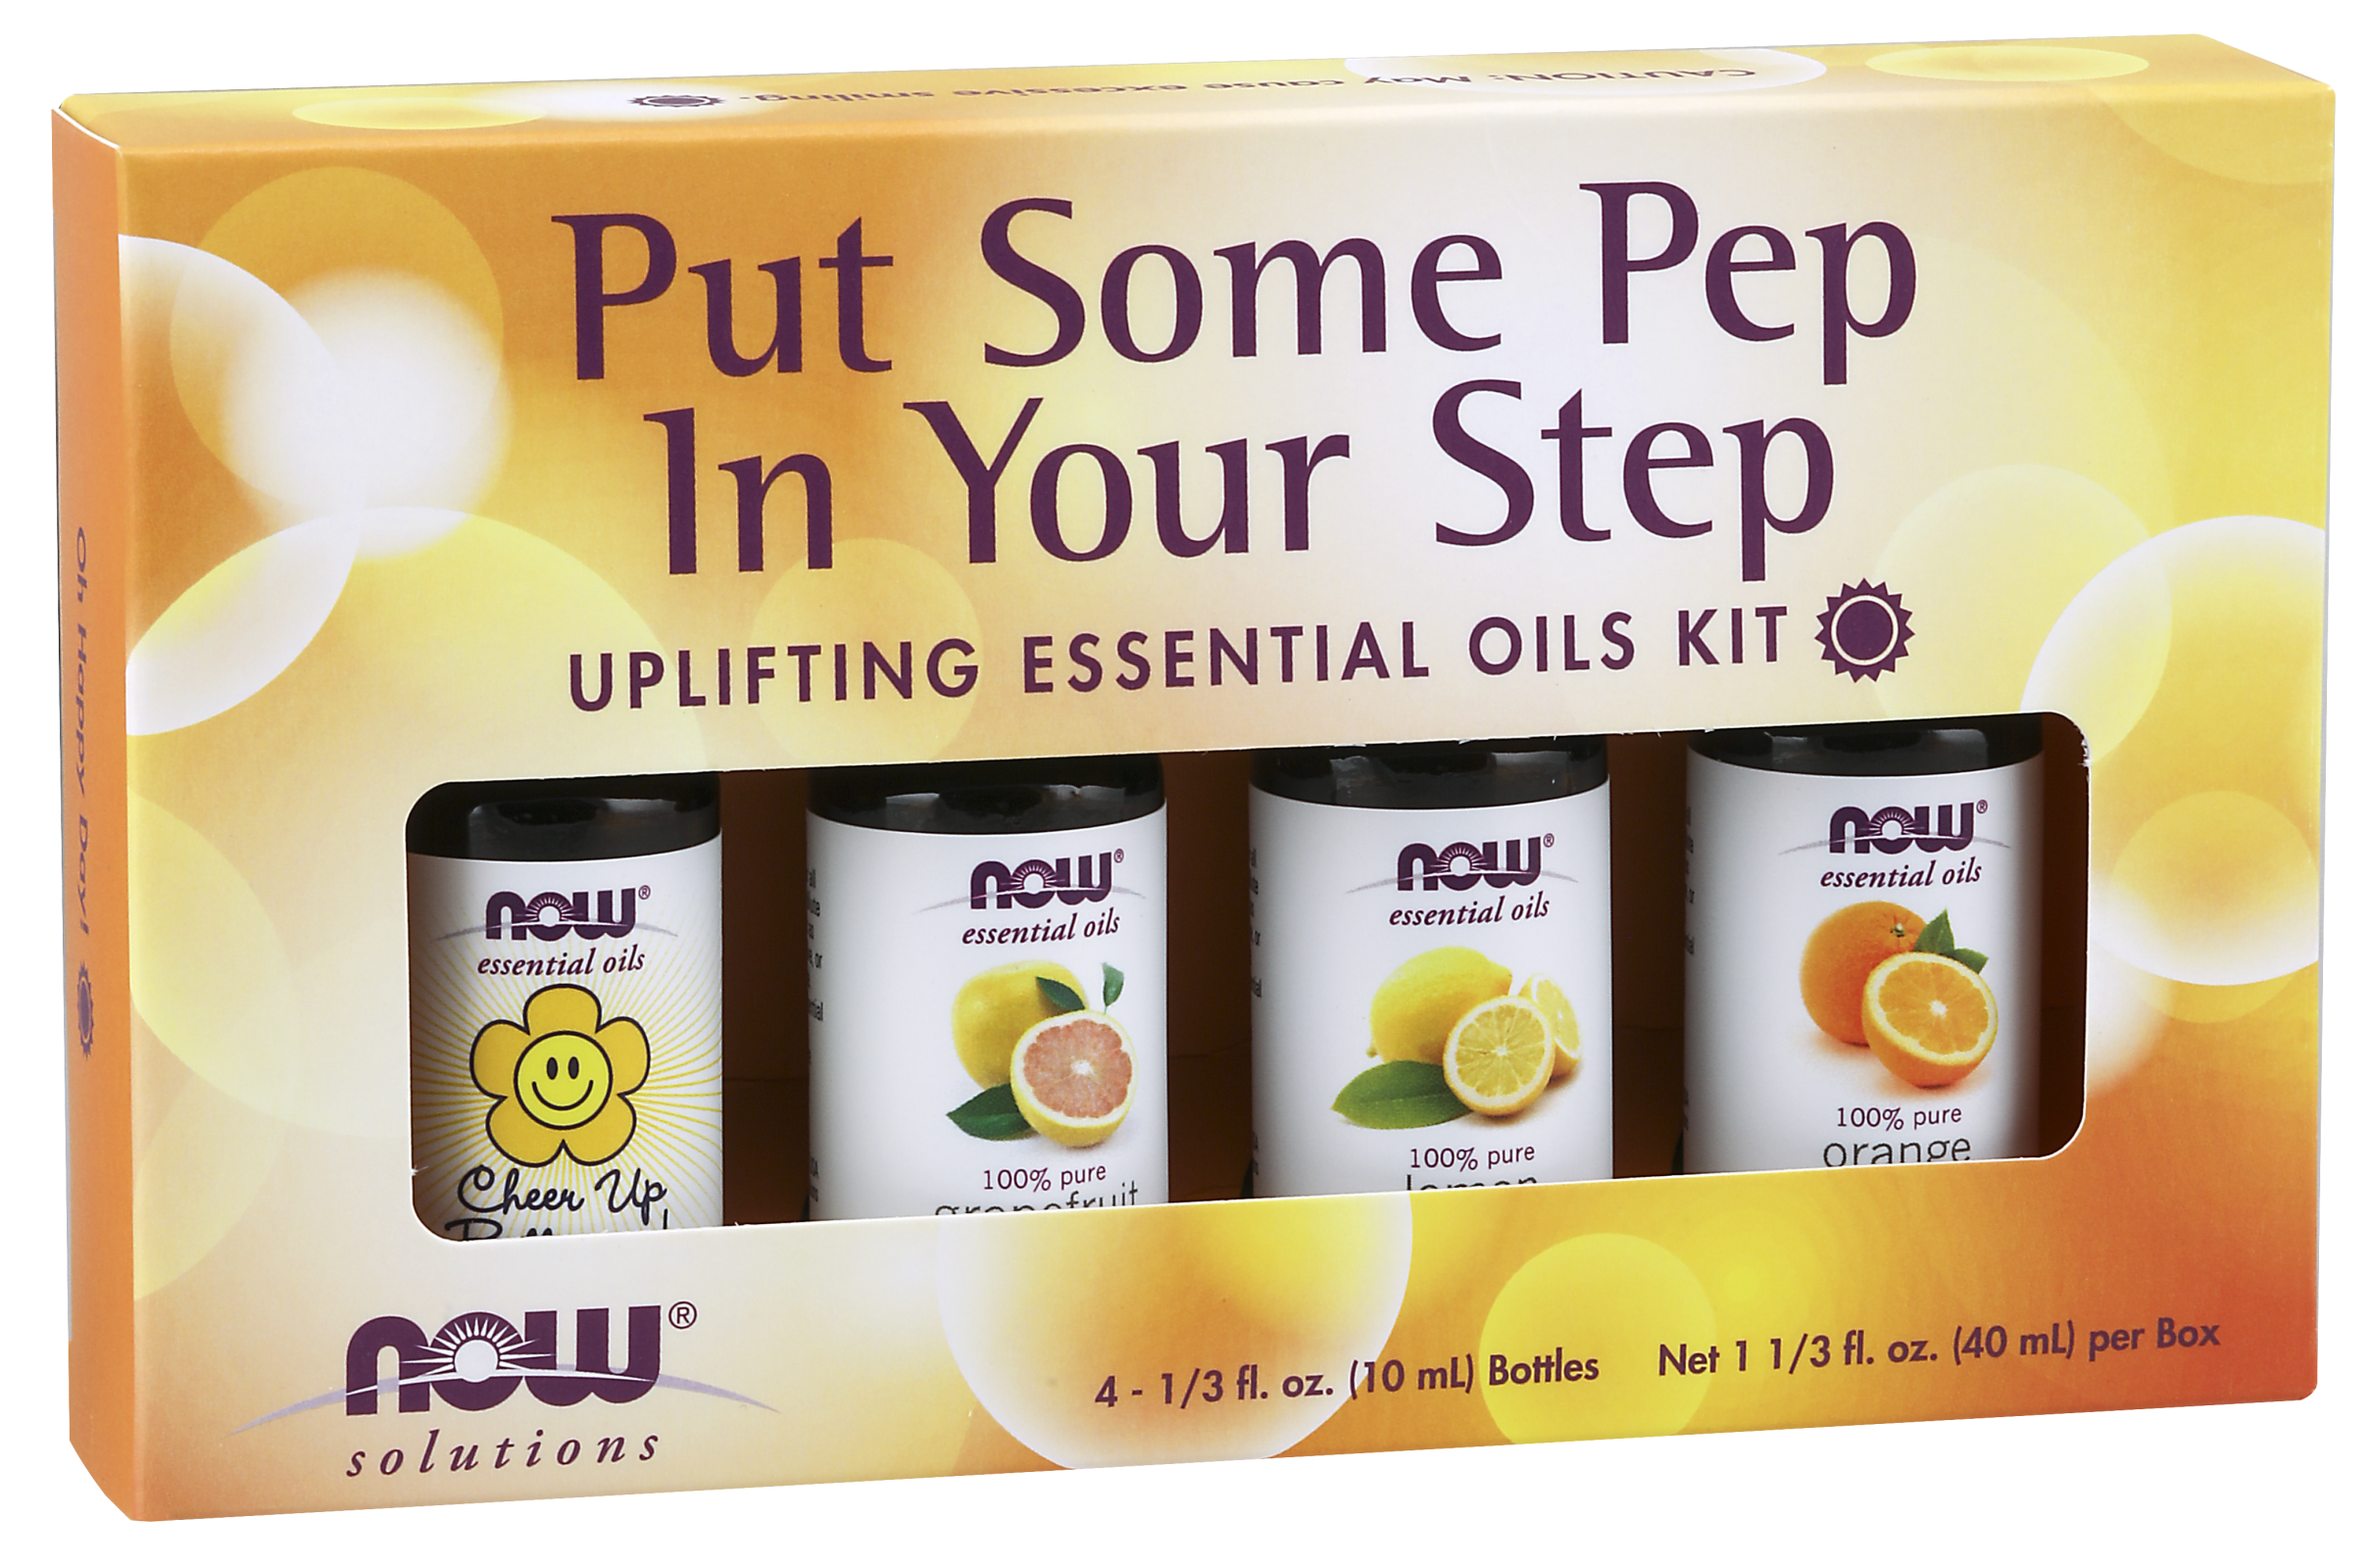 Put Some Pep in Your Step Essential Oils Kit box front